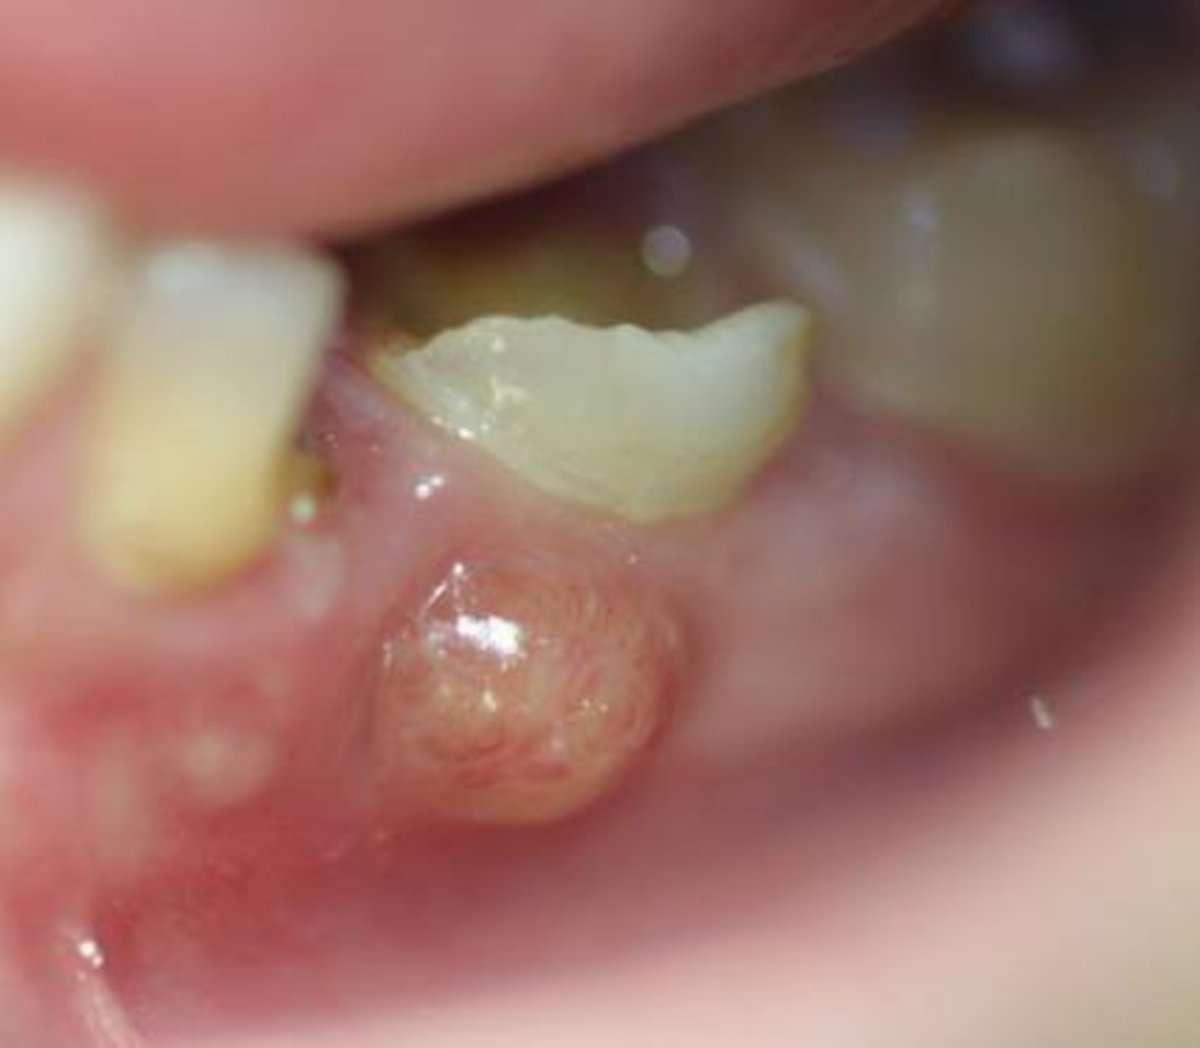 How to Pop a Dental Abscess by Yourself